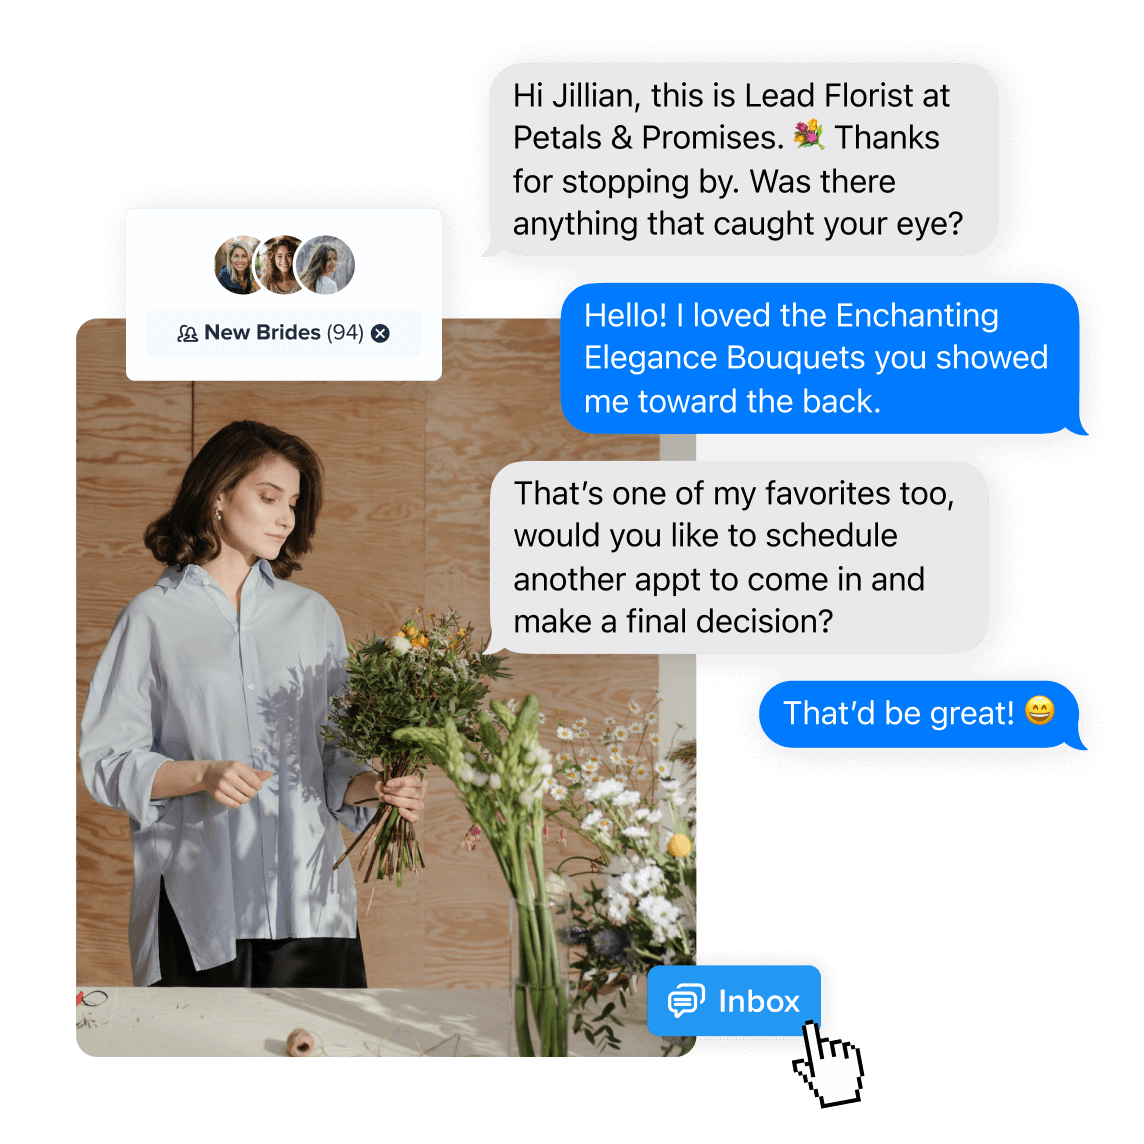 A florist engaging with a customer through a mass texting platform, discussing favorite bouquets and scheduling follow-up appointments, highlighting the use of mass texting for personalized customer service in small businesses.